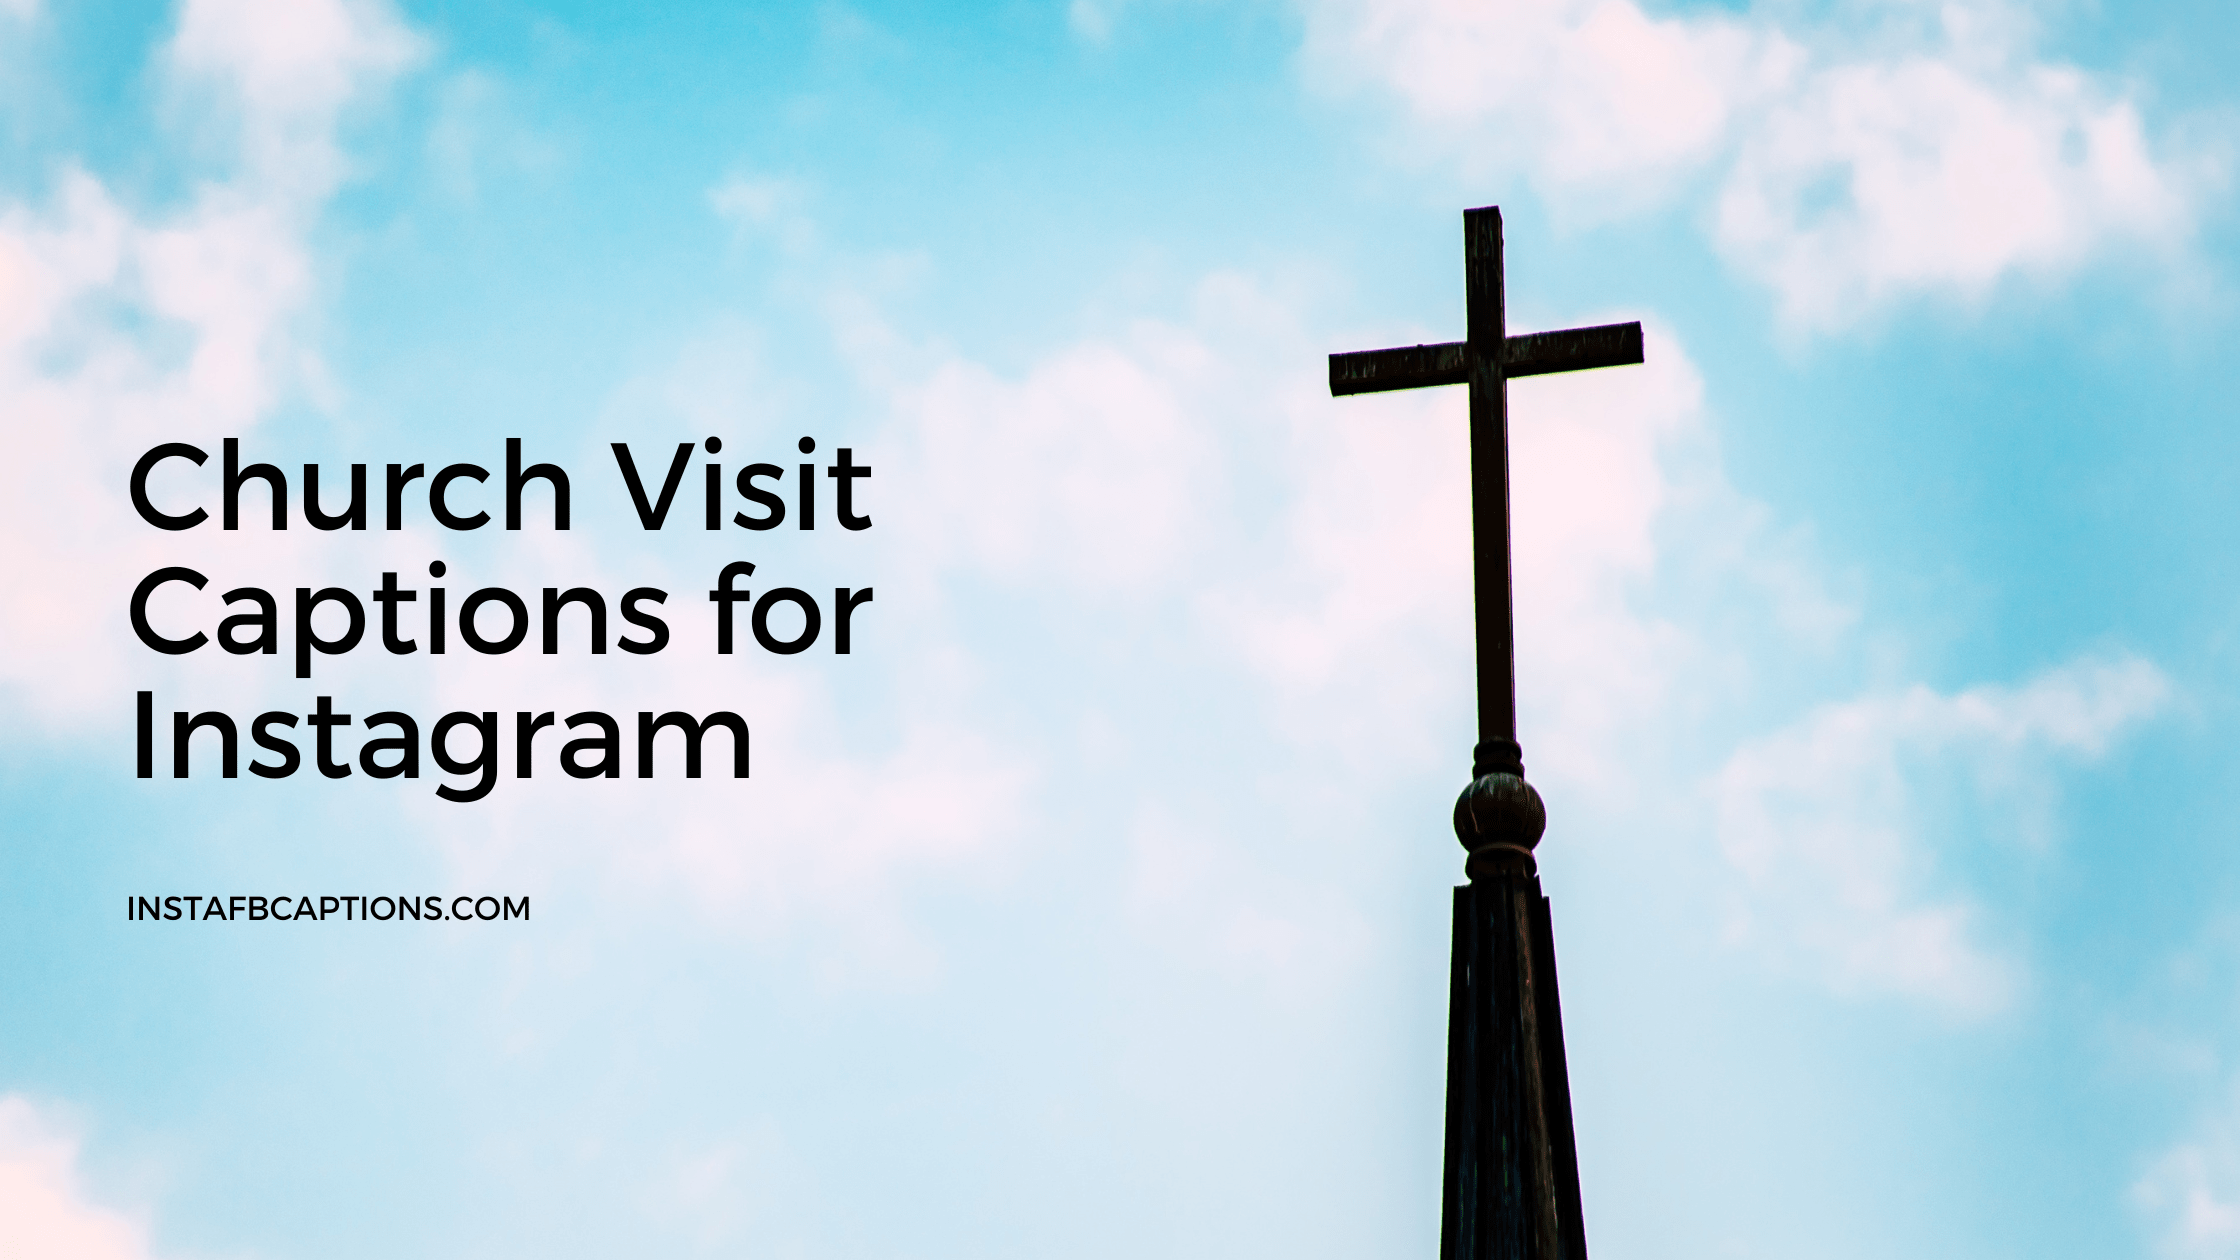 Church Visit Captions For Instagram  - Church Visit Captions for Instagram - [New] Church Visit Captions for Instagram in 2023